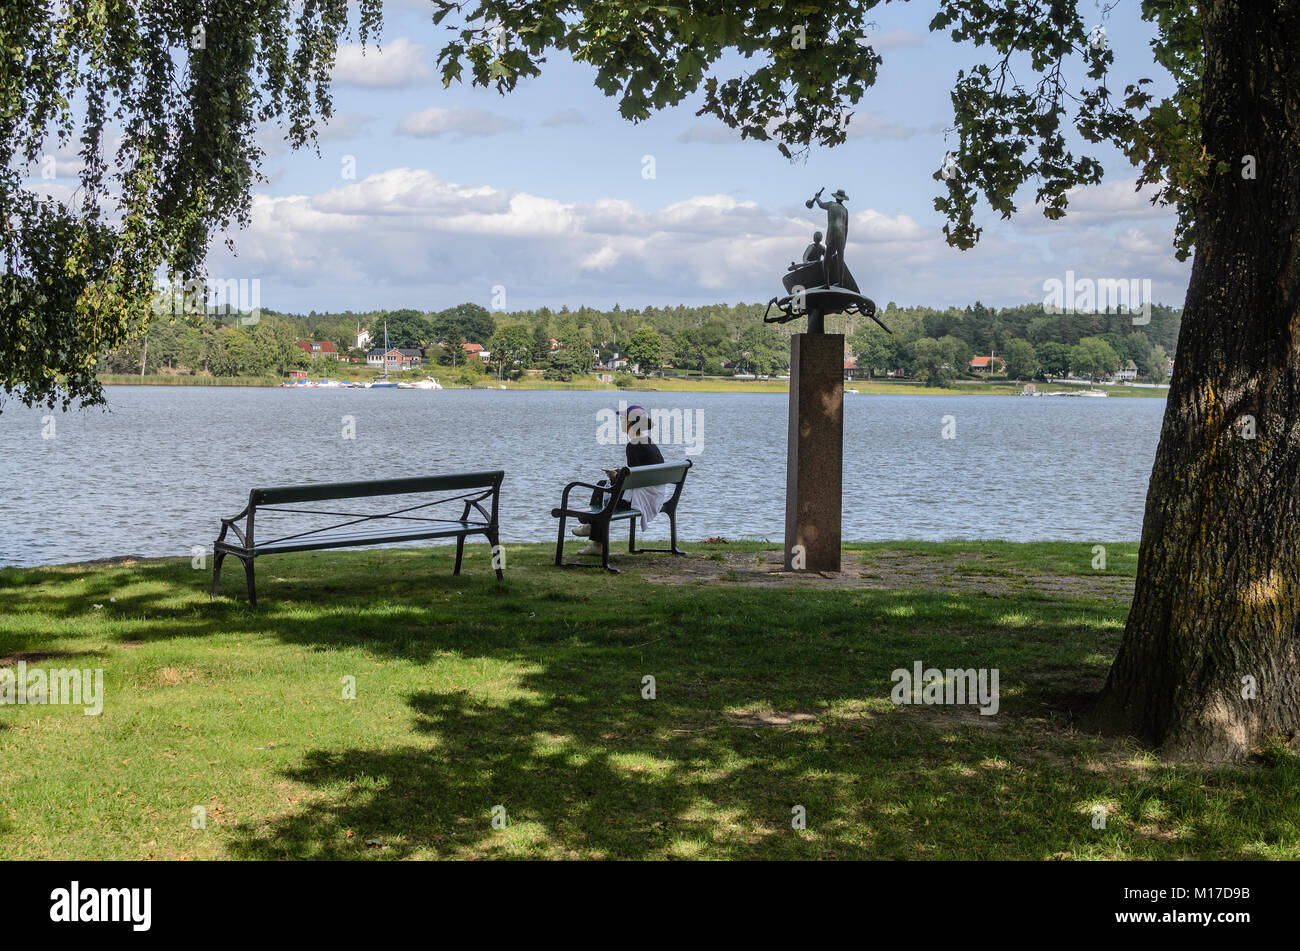 At Lurudden you can sit and enjoy the view. Stock Photo